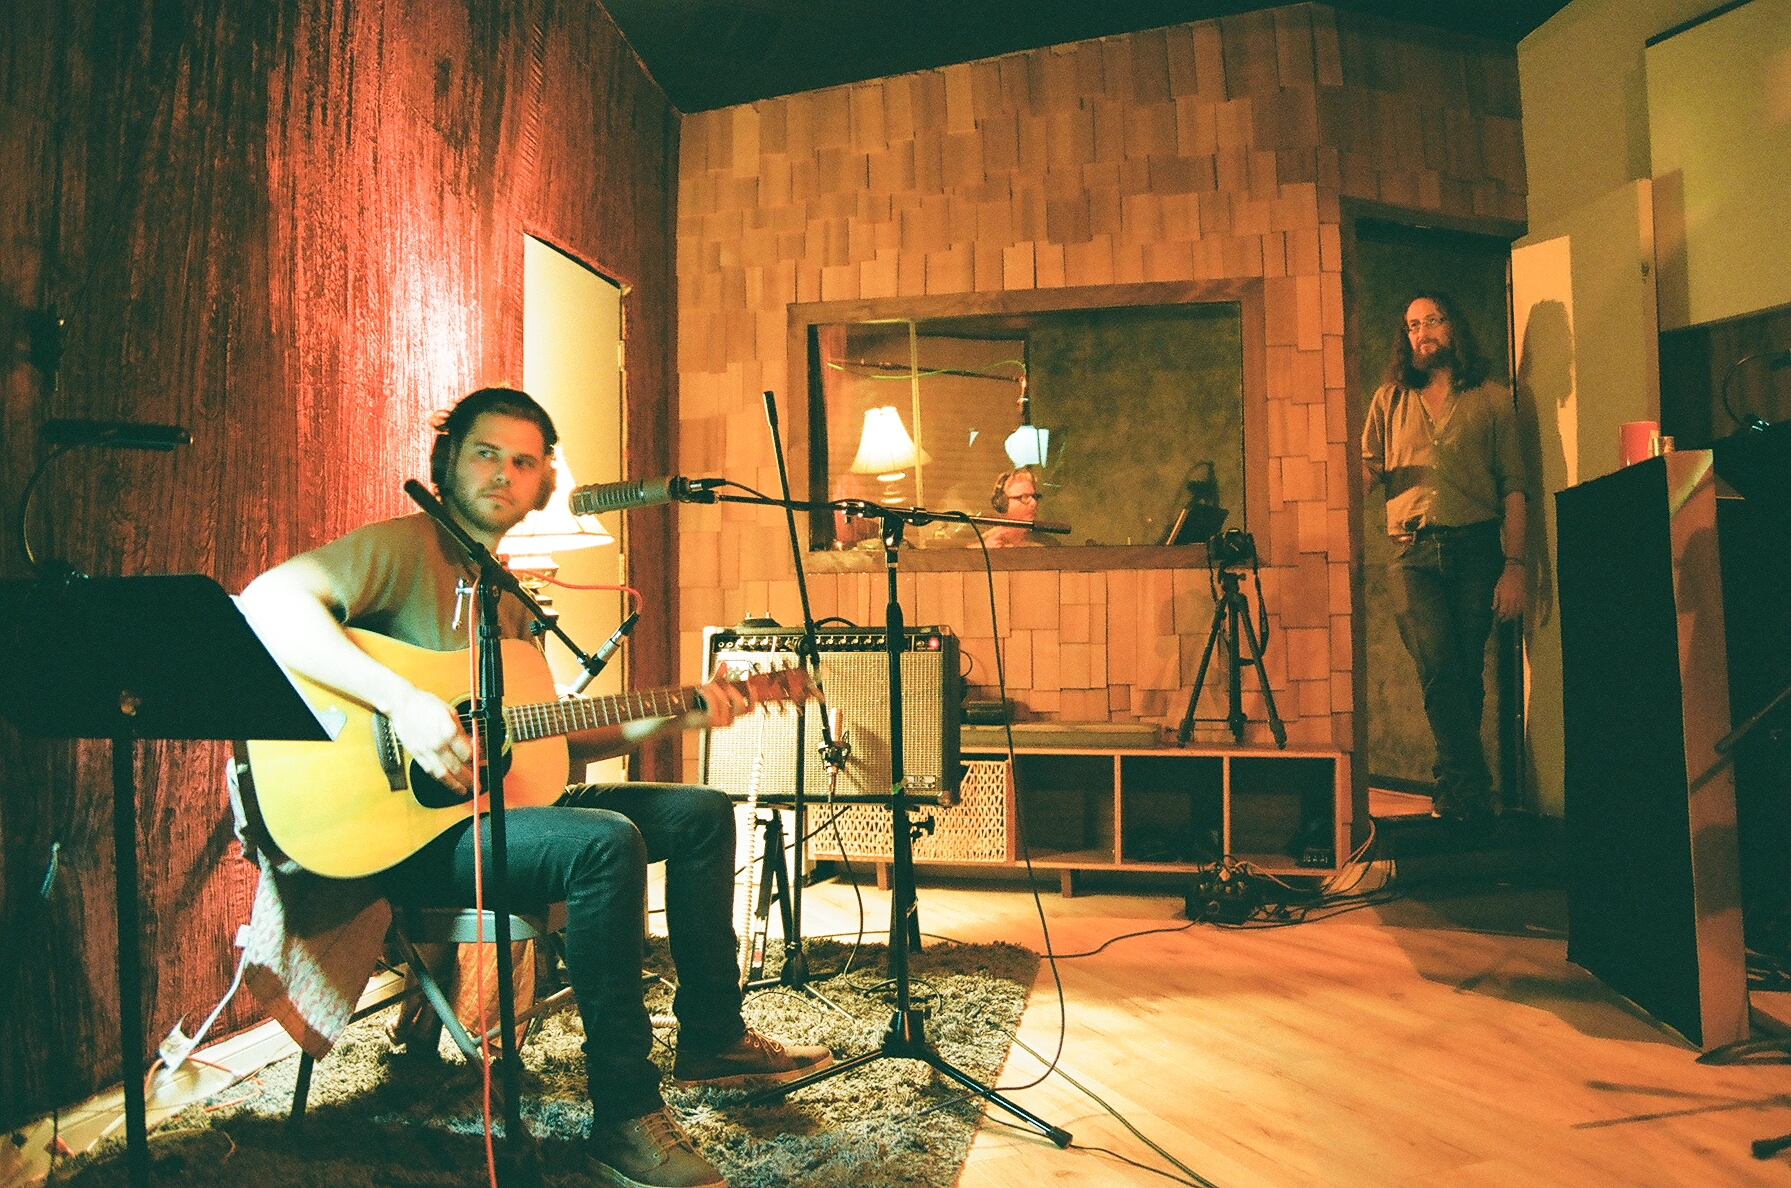 Singer/songwriter Chad Richard (Caleb Trask) and Chris Schlarb (Photo by Devin O'Brien)